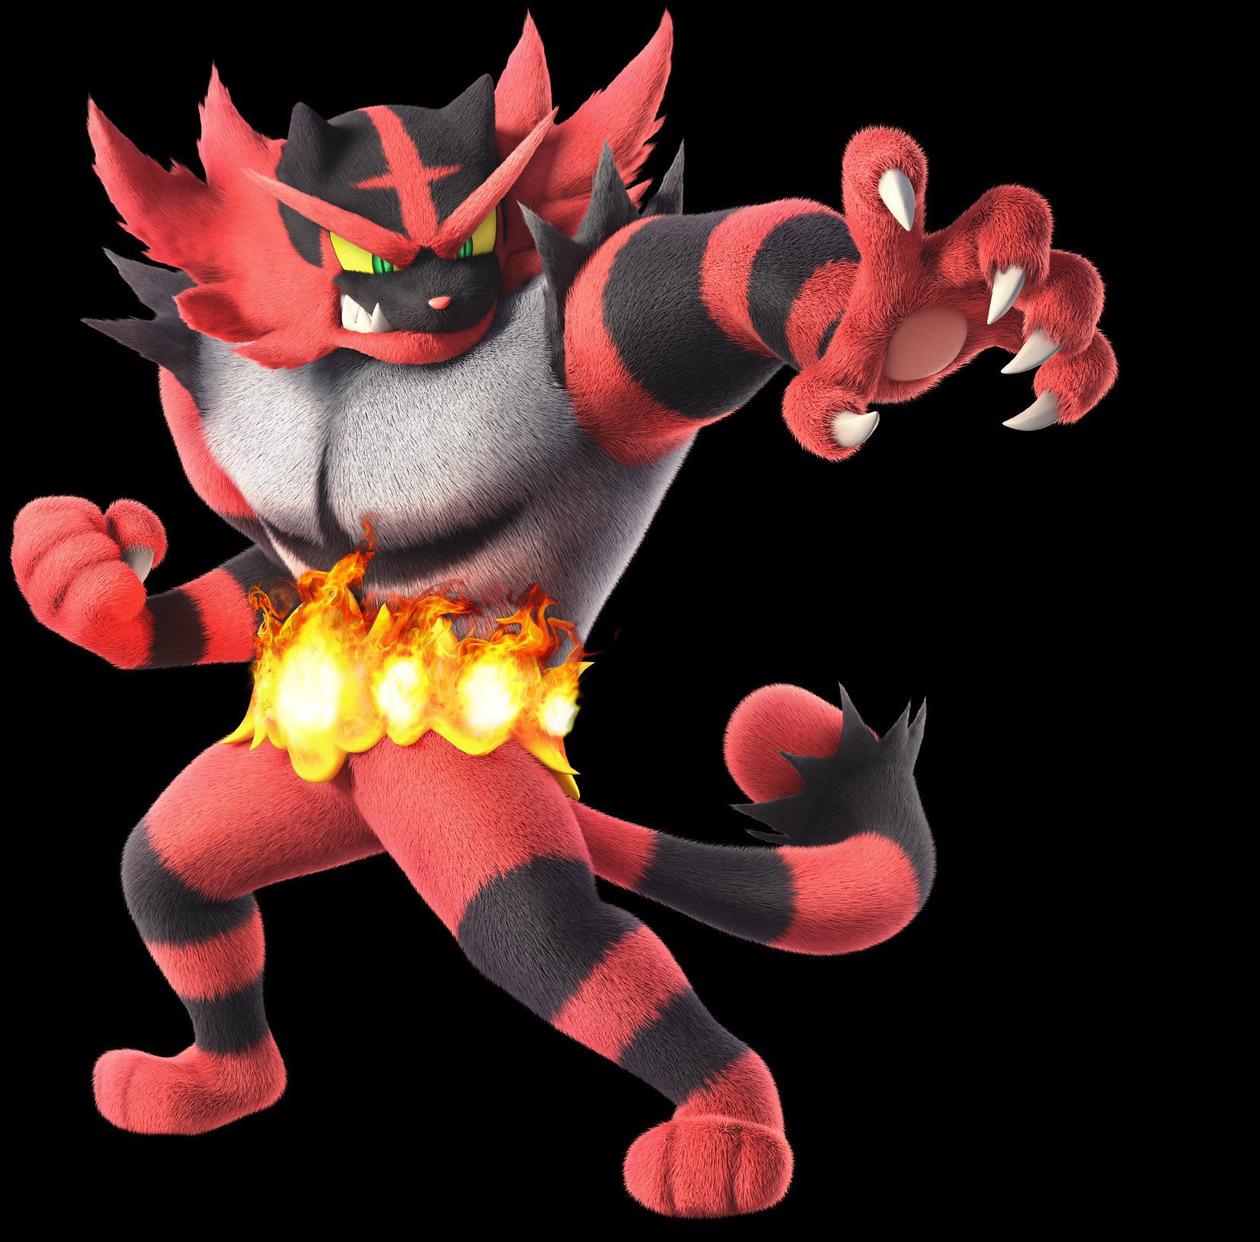 Incineroar, but with an iPhone XS Max resolution